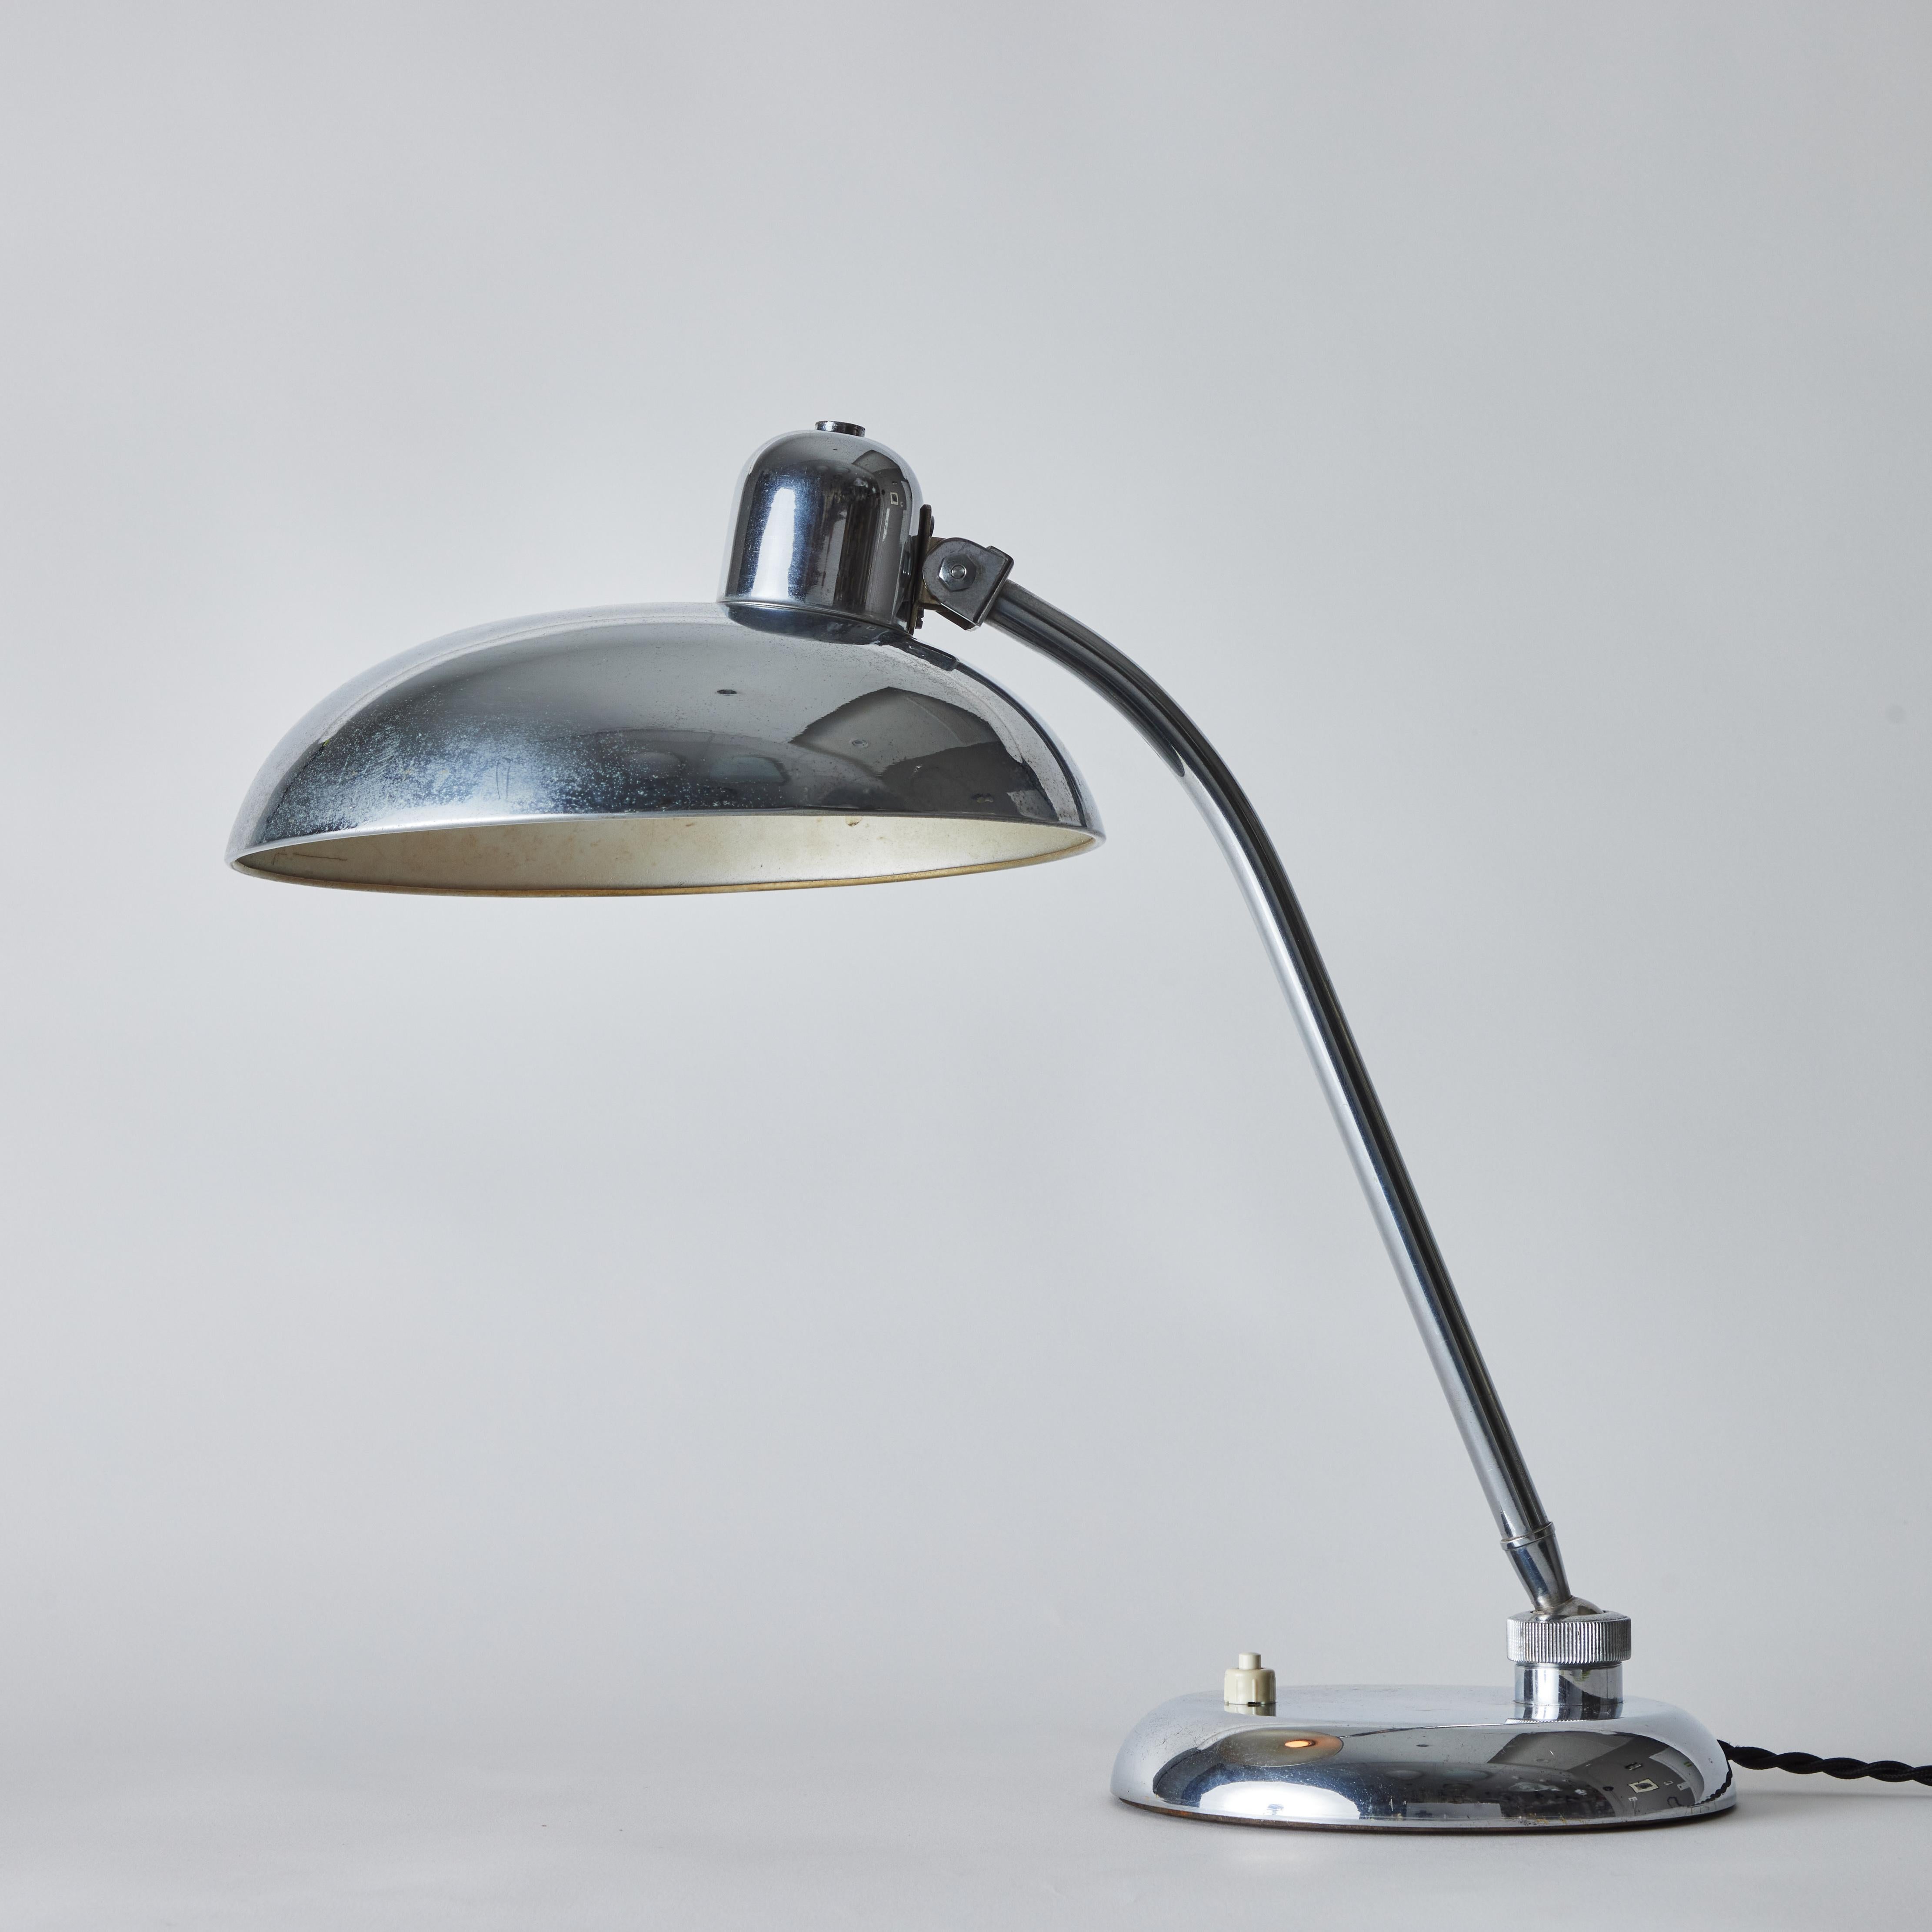 1940s Giovanni Michelucci Chrome Ministerial Table Lamp for Lariolux For Sale 6